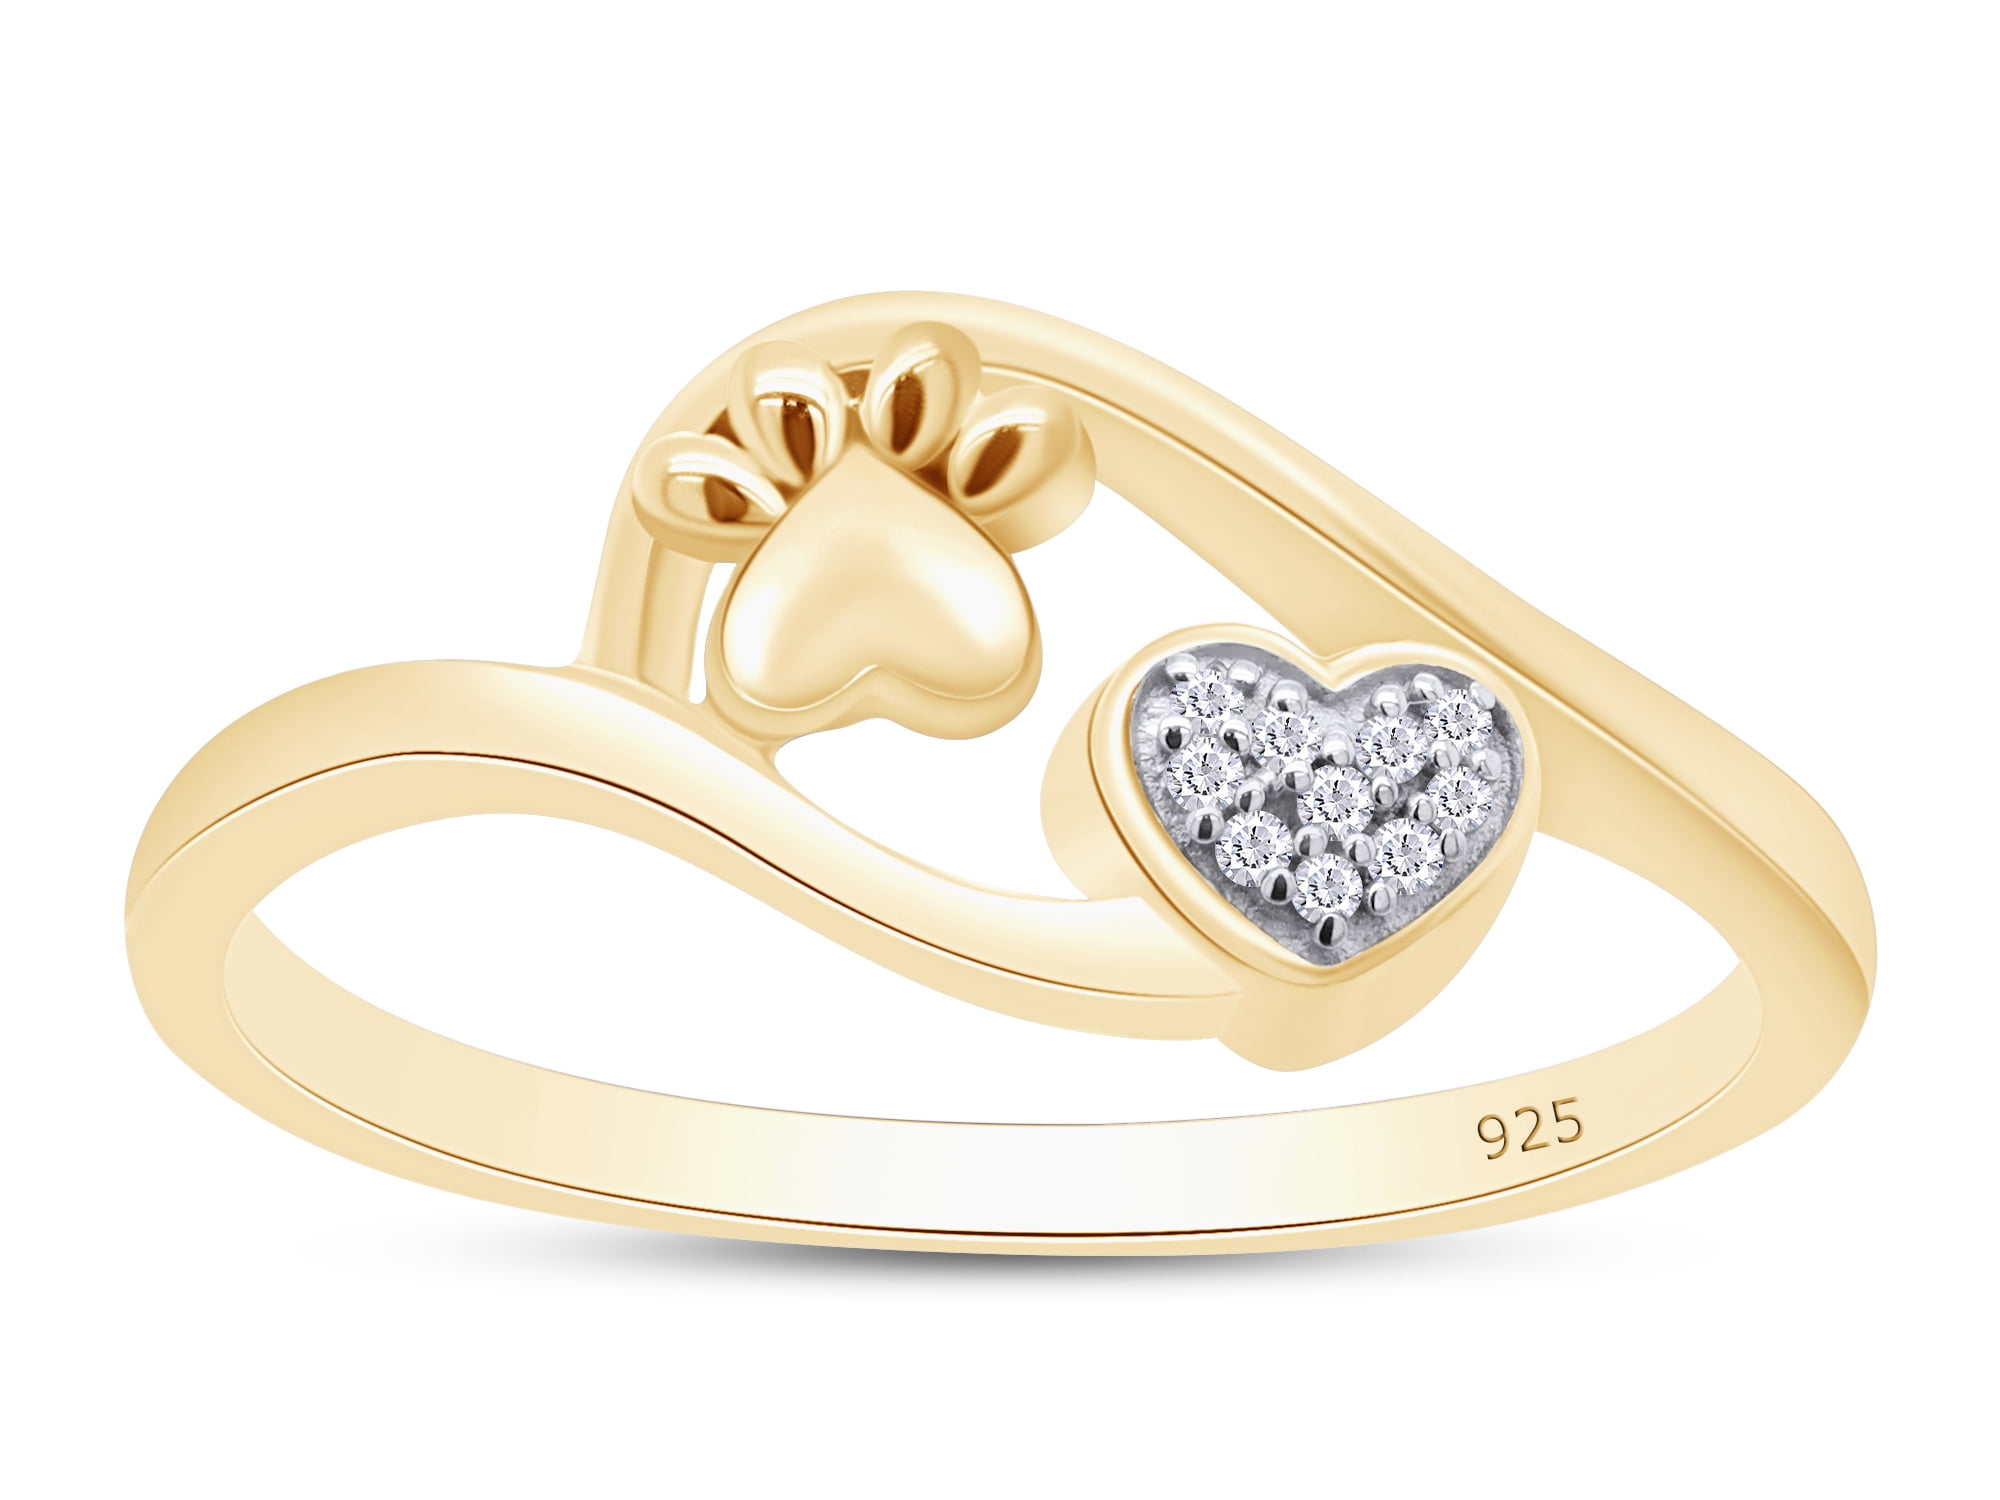 White Natural Diamond Accent Paw Print Heart Ring In 14k Yellow Gold Over Sterling Silver dc2d59fc 92c1 443f abe8 f45e7752e1e4.213e8af89663bf7eead2a34041391cb2